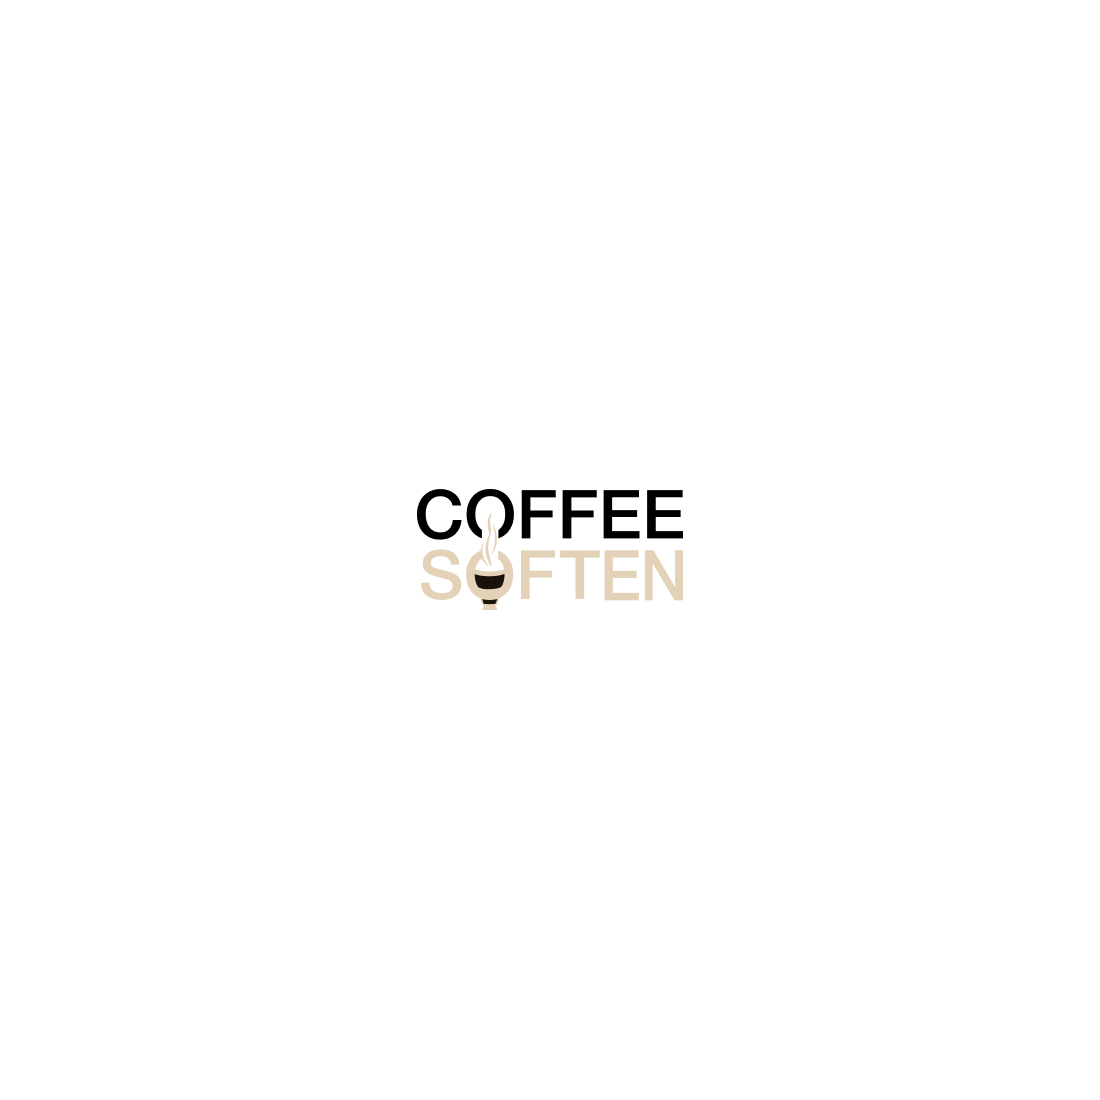 Coffee shop logo design Сoffee Soften cover image.